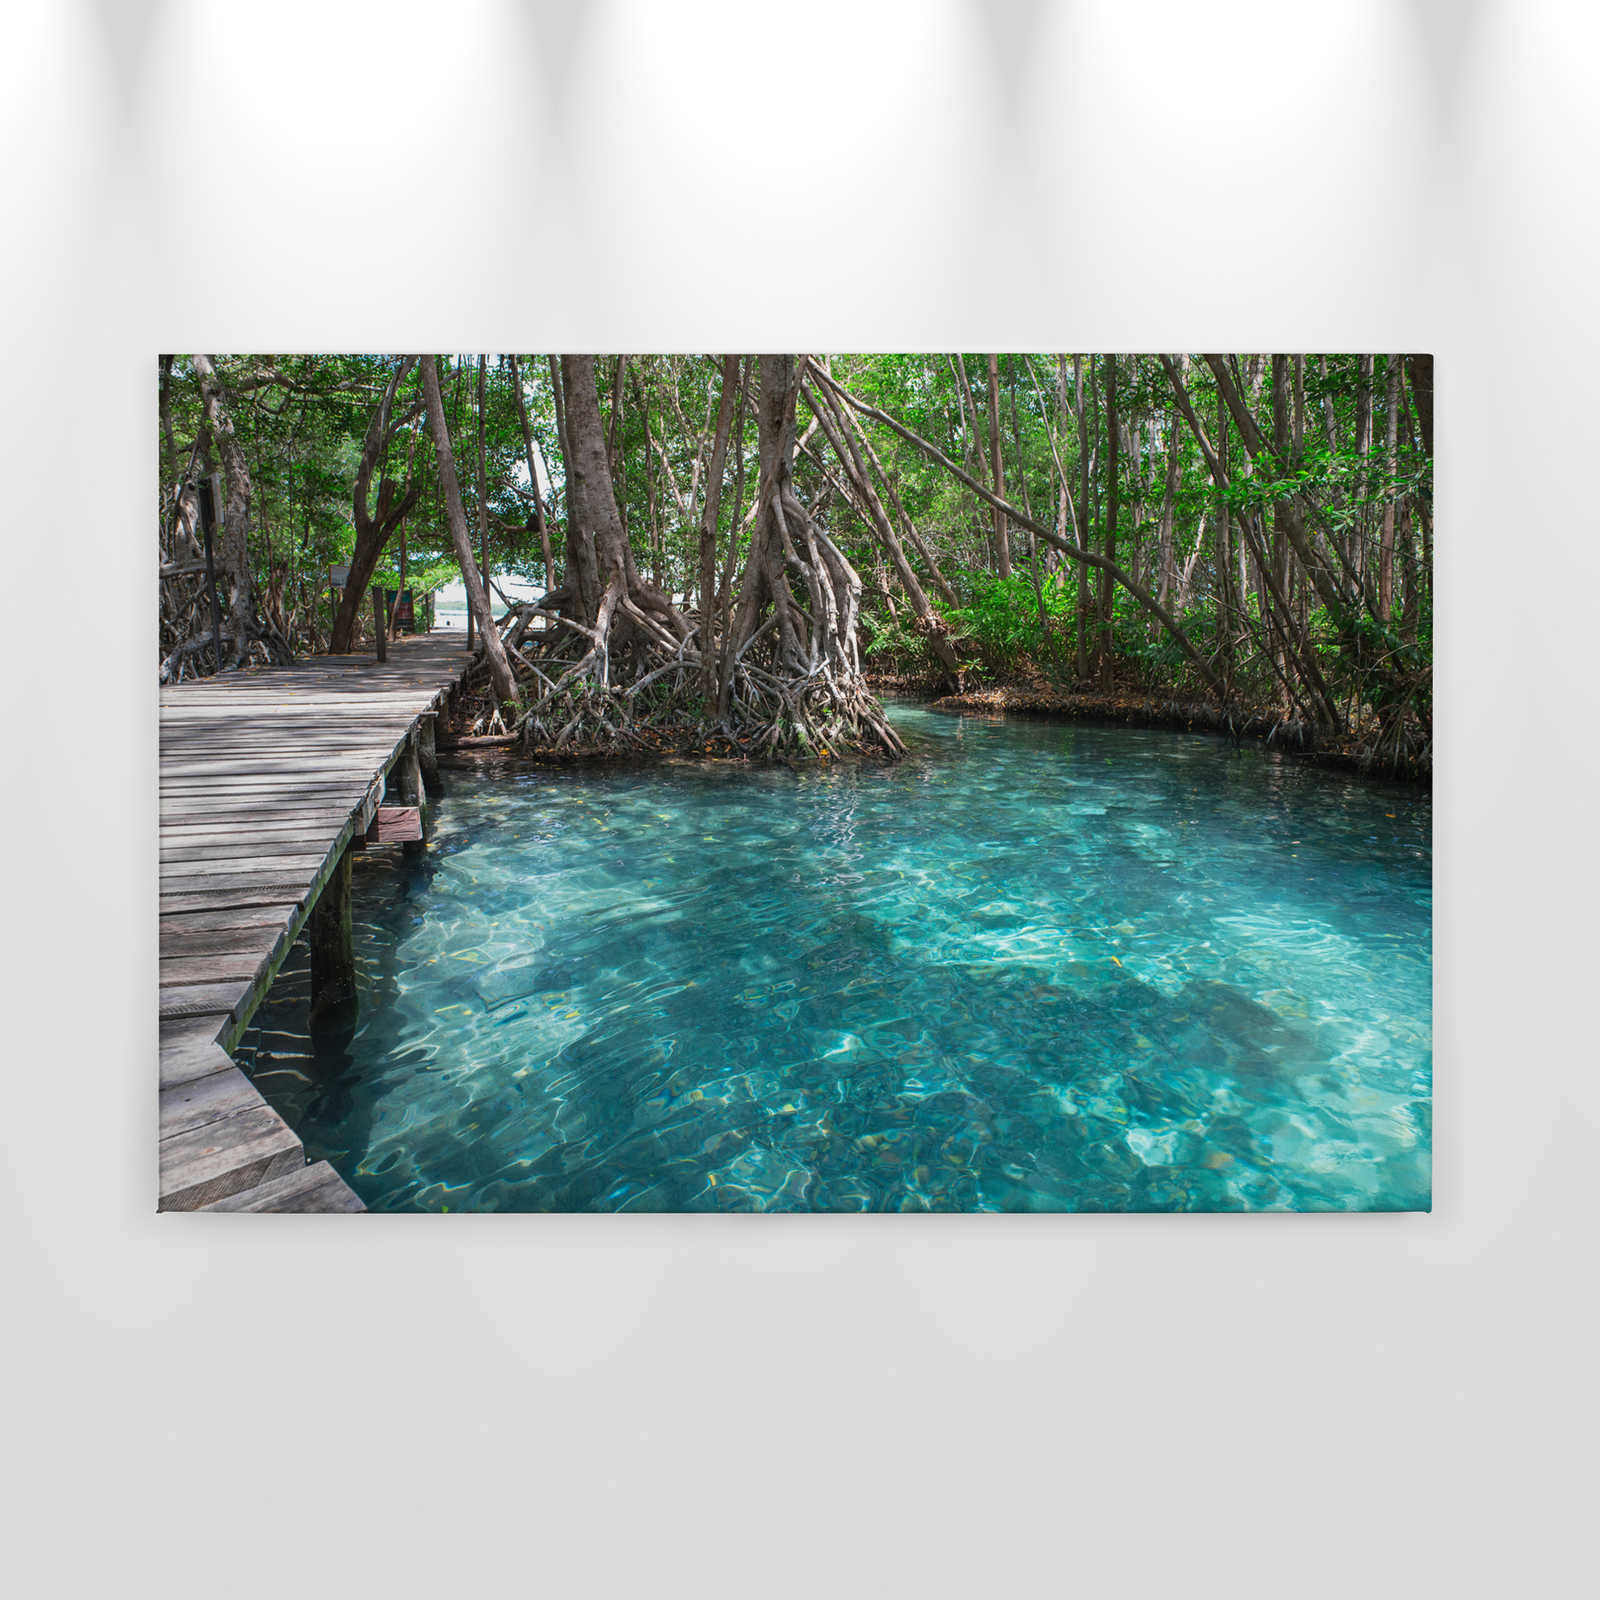             Canvas with wooden path over a lake in the jungle - 0.90 m x 0.60 m
        